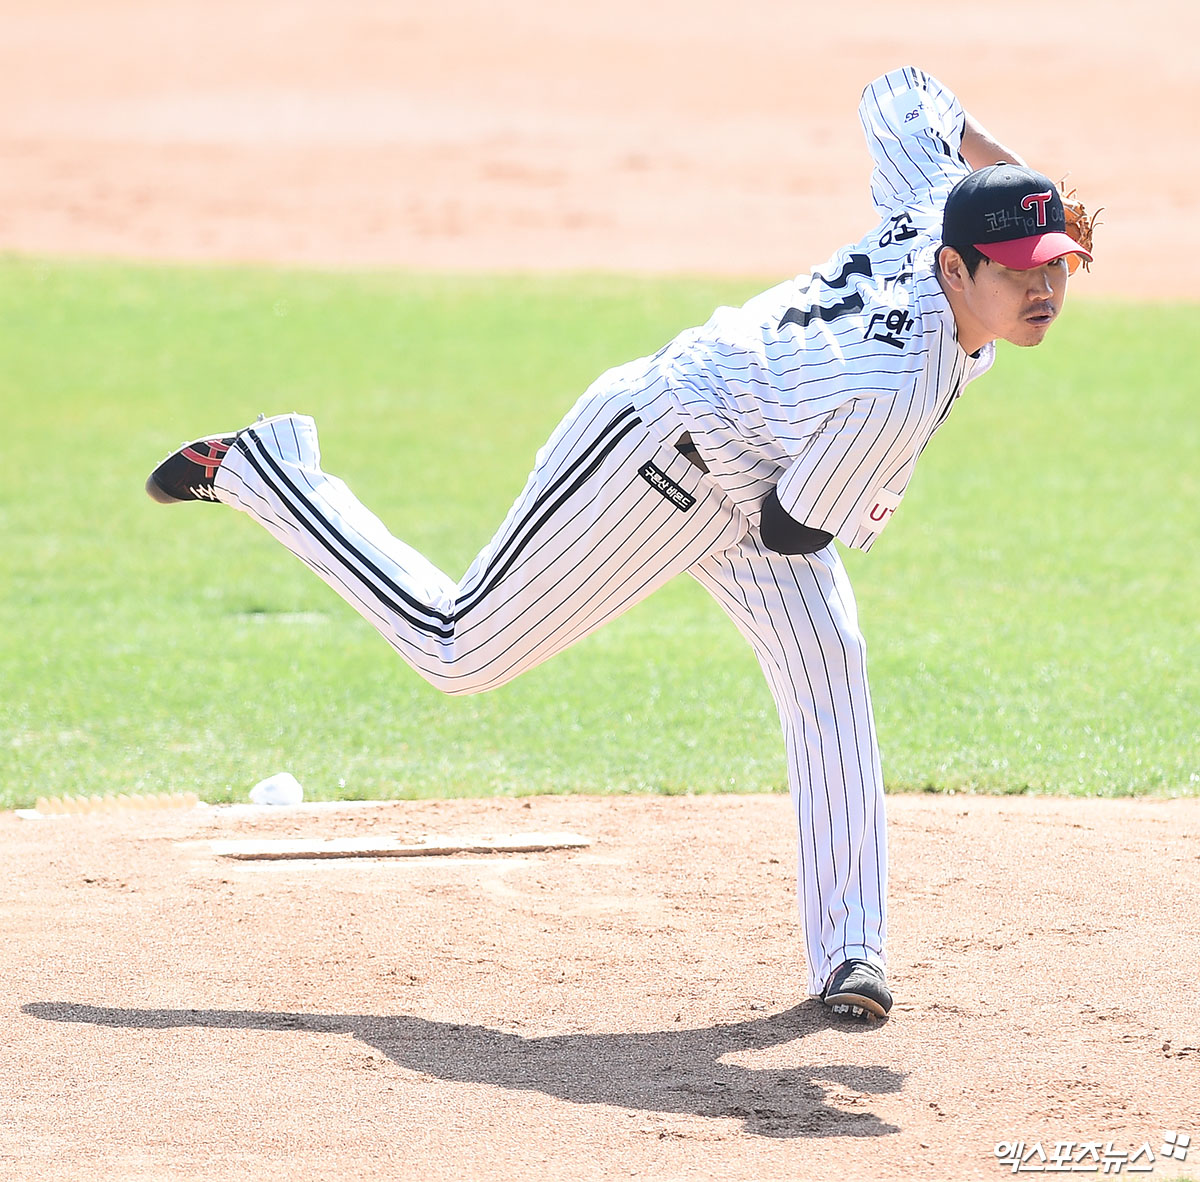 LG Twins Jeong Chan-Heon has won his first win of the season - a record of as many as 12 years.LG won 15-4 in the second leg of the Twenty20 Shinhan Bank SOL KBO League Hanhwa team at the Festival Hanhwa Life Eagles Park on the 27th.With the victory, LG won 13 wins and 6 losses in the season with three consecutive wins and secured five consecutive winning series.Jeong Chan-Heon, who started as a starter on the day, pitched three runs with five hits in six innings (2 homers) and six strikeouts and scored his first win of the season.It was a starting victory in 4390 days after Daegu Samsung on May 20, 2008.Jeong Chan-Heon, who threw 78 balls on the day, tied the Hanhwa line with a pitch, forkball, curve and slider evenly on the top 144km/h The.Jeong Chan-Heon is starting the starting lineup with a 10-day turn with Lee Min-ho with five starts.It is also a plan to select both Jeong Chan-Heon and Lee Min-ho in preparation for a tight schedule, but it is also a consideration for Jeong Chan-Heon who has undergone a Waist surgery.I think my wife will like it the most, Kyonggi said after.It took a long time to win again, he said to Jeong Chan-Heon, who said, I did not know how to make a selection.I have been working hard as a bullpen and have returned to the starting lineup because of surgery, but I am satisfied because I have good results and I am getting better. The starting run for Jeong Chan-Heon was unexpected but not a sudden decision.Jeong Chan-Heon said, I did not go to Okinawa Camp and prepared a second camp in Icheon. I talked about training parts and selection from that time, and I heard about Choi Il-eun Kochi.I thought it would be better to pour one Kyonggi over and recover than to play, but I had the same surgery twice, but it was in the middle at first, and now Im going to the starting lineup.I know its a little bit later, but so far its going well inspiringly. As for the part that has a turn on the 10th, It is literally a part of the staff.It seems that there is a meaning to throw a Kyonggi one Kyonggi well, he said. I am making my body well for ten days to meet the expectation because I care a lot about my physical condition.So I think that Kyonggi also has a good result. Photo = DB